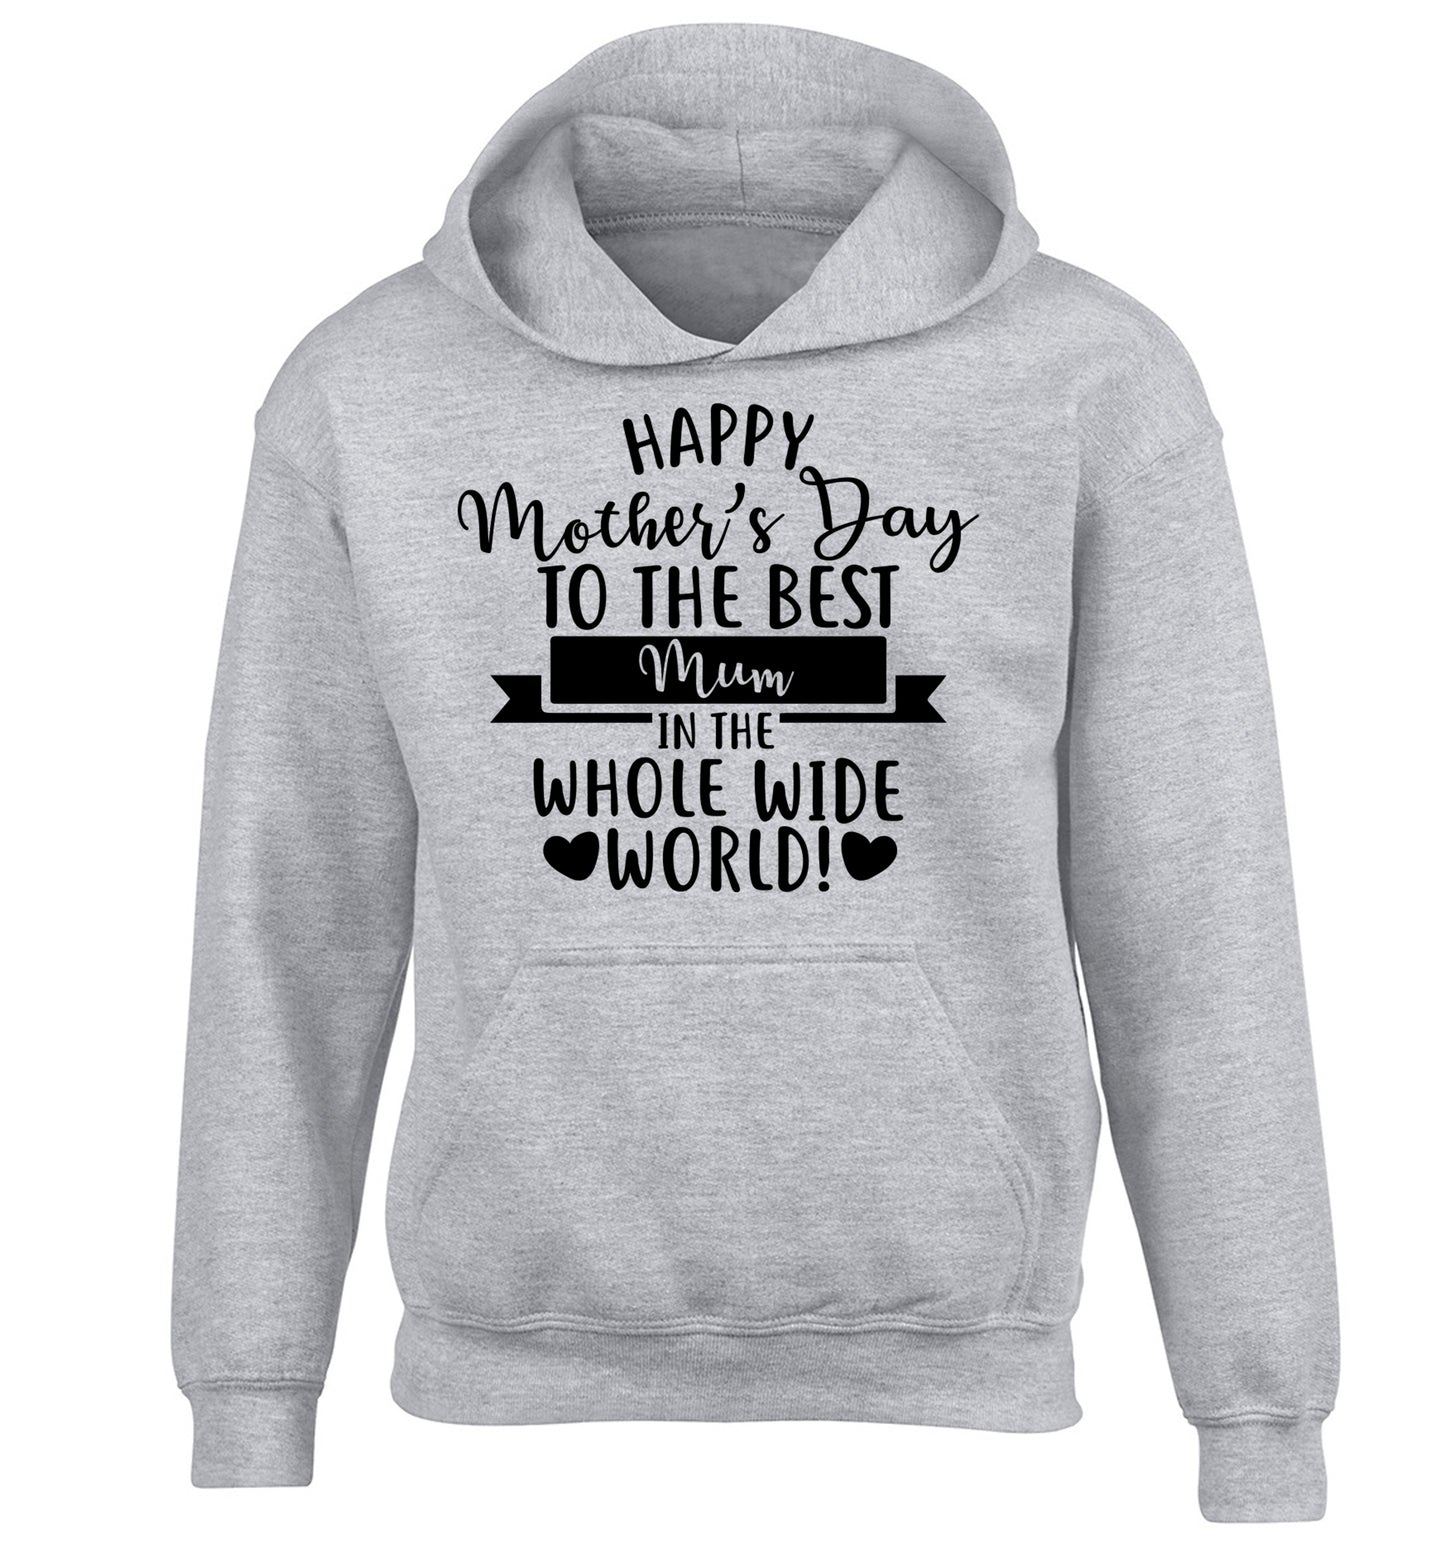 Happy Mother's Day to the best mum in the whole wide world! children's grey hoodie 12-13 Years